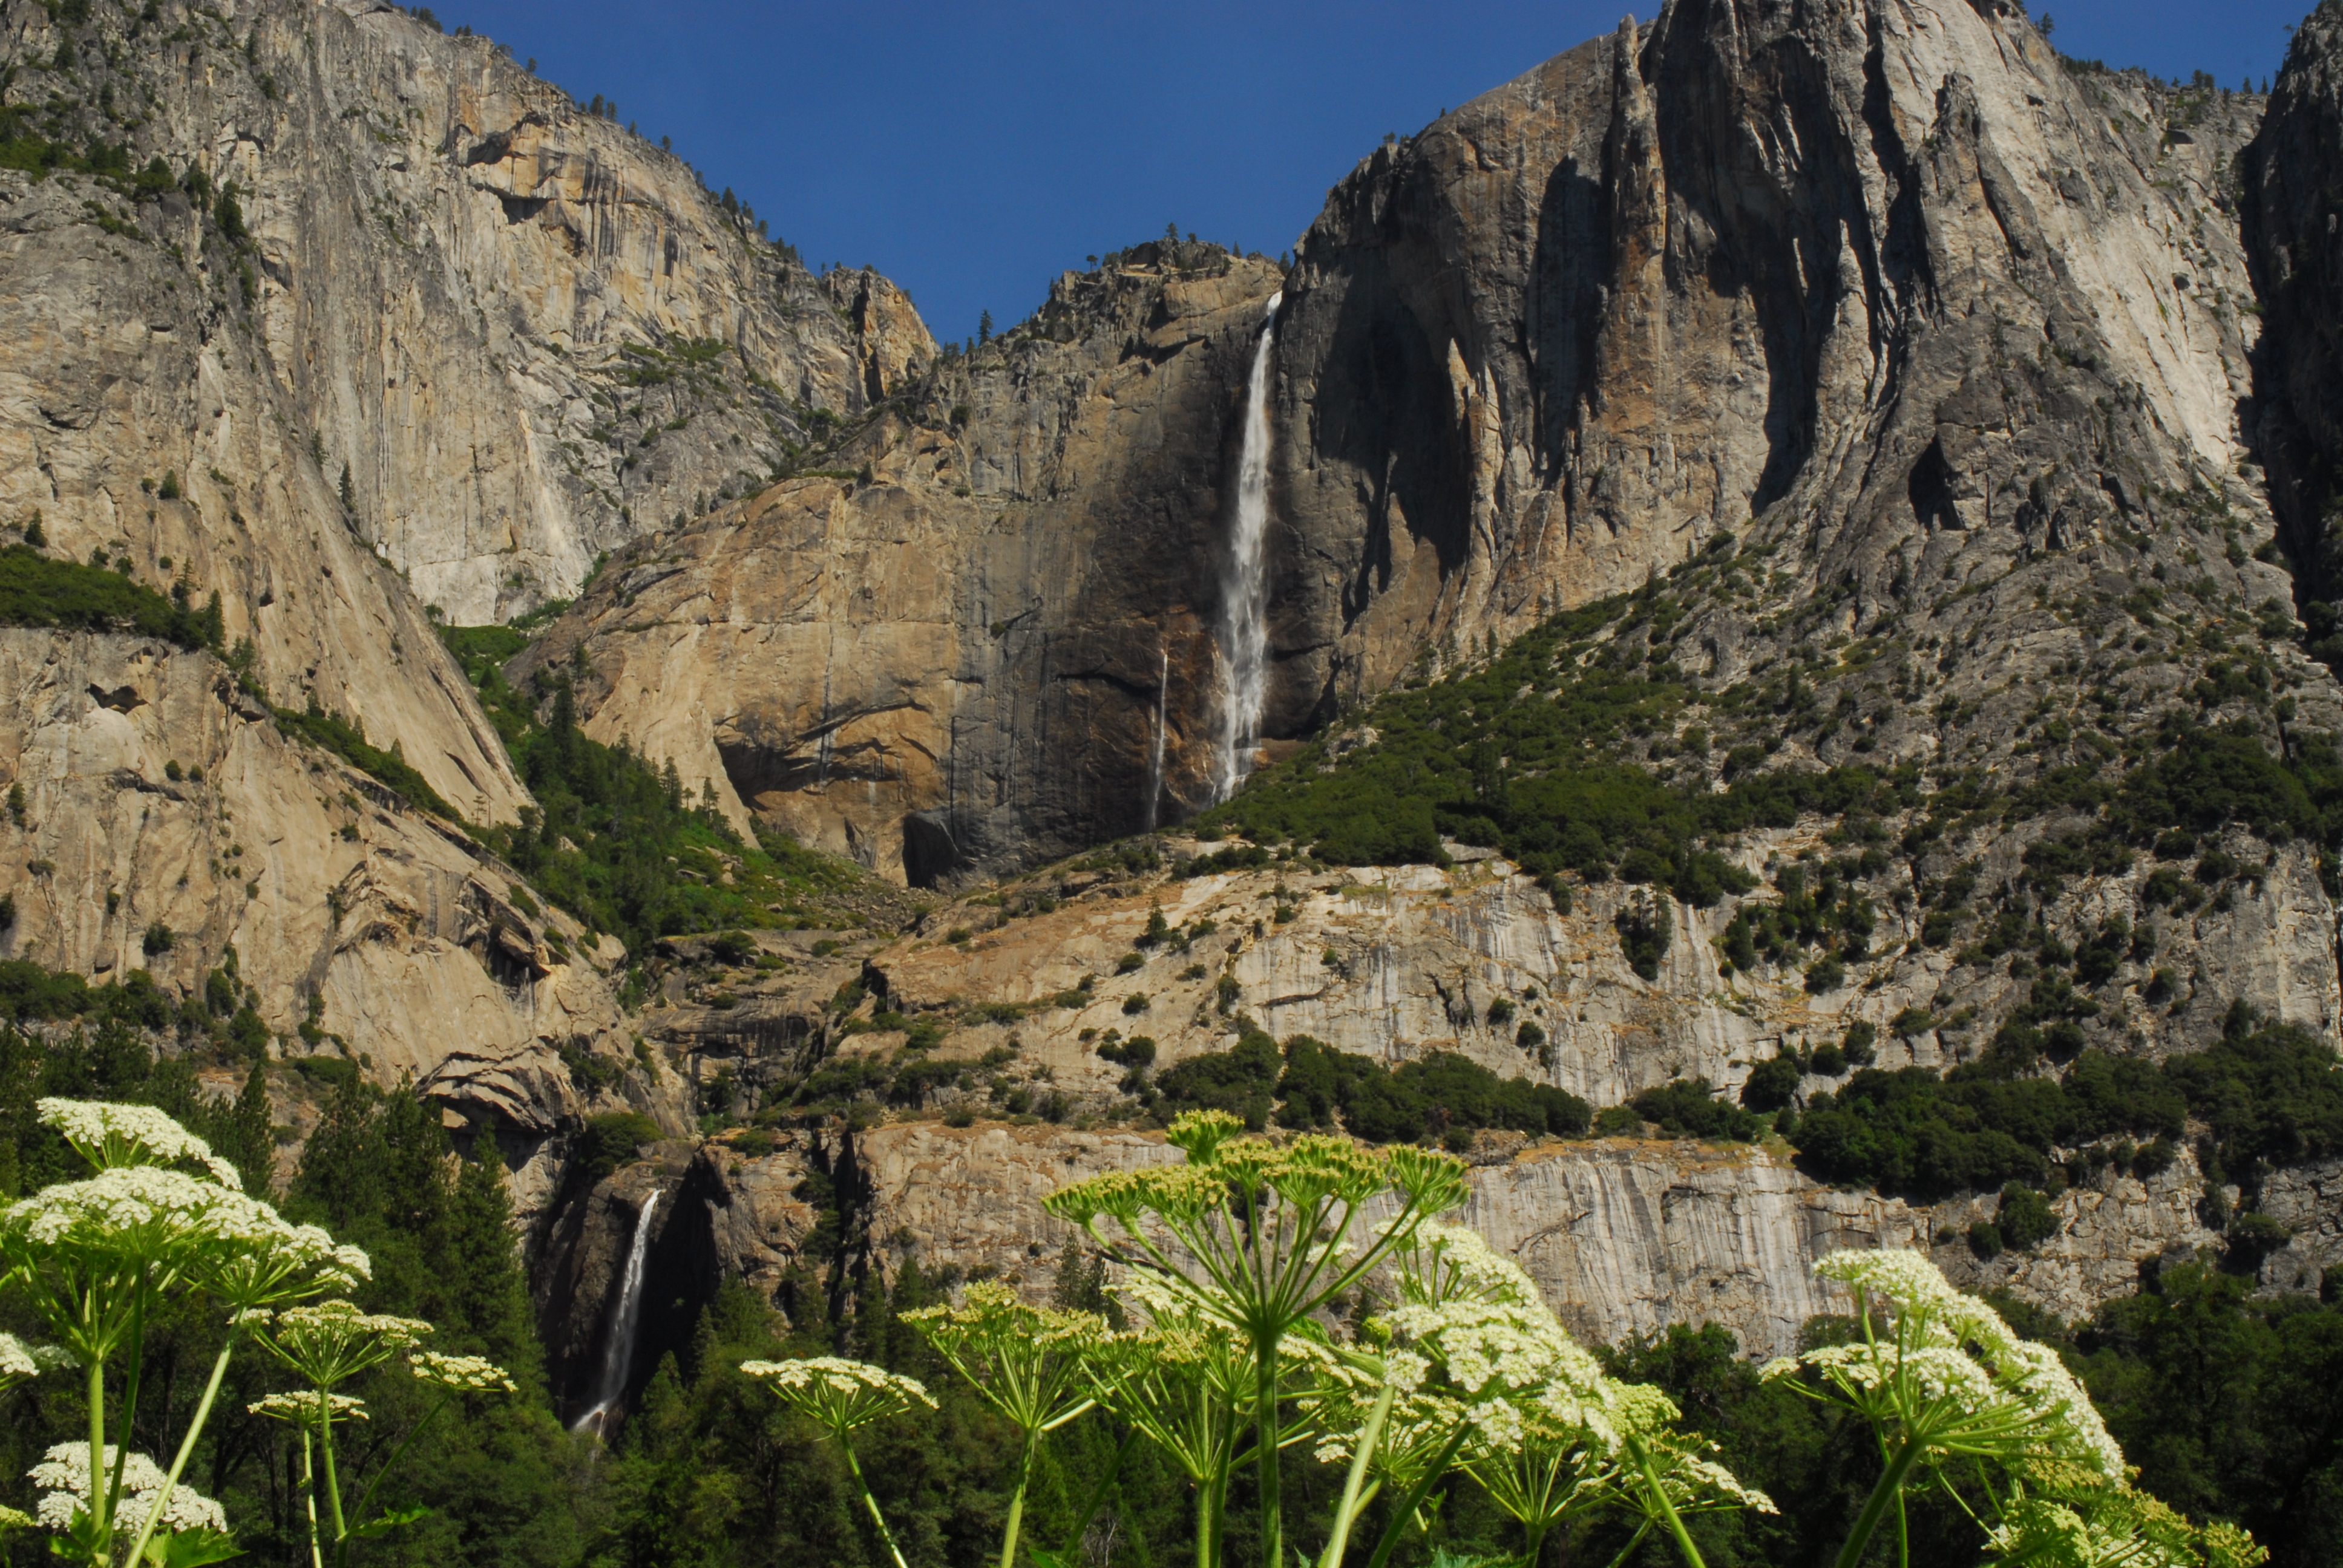 Cow parsnip, Upper and Lower Yosemite Falls  -  From Cook’s Meadow, Yosemite National Park, California  